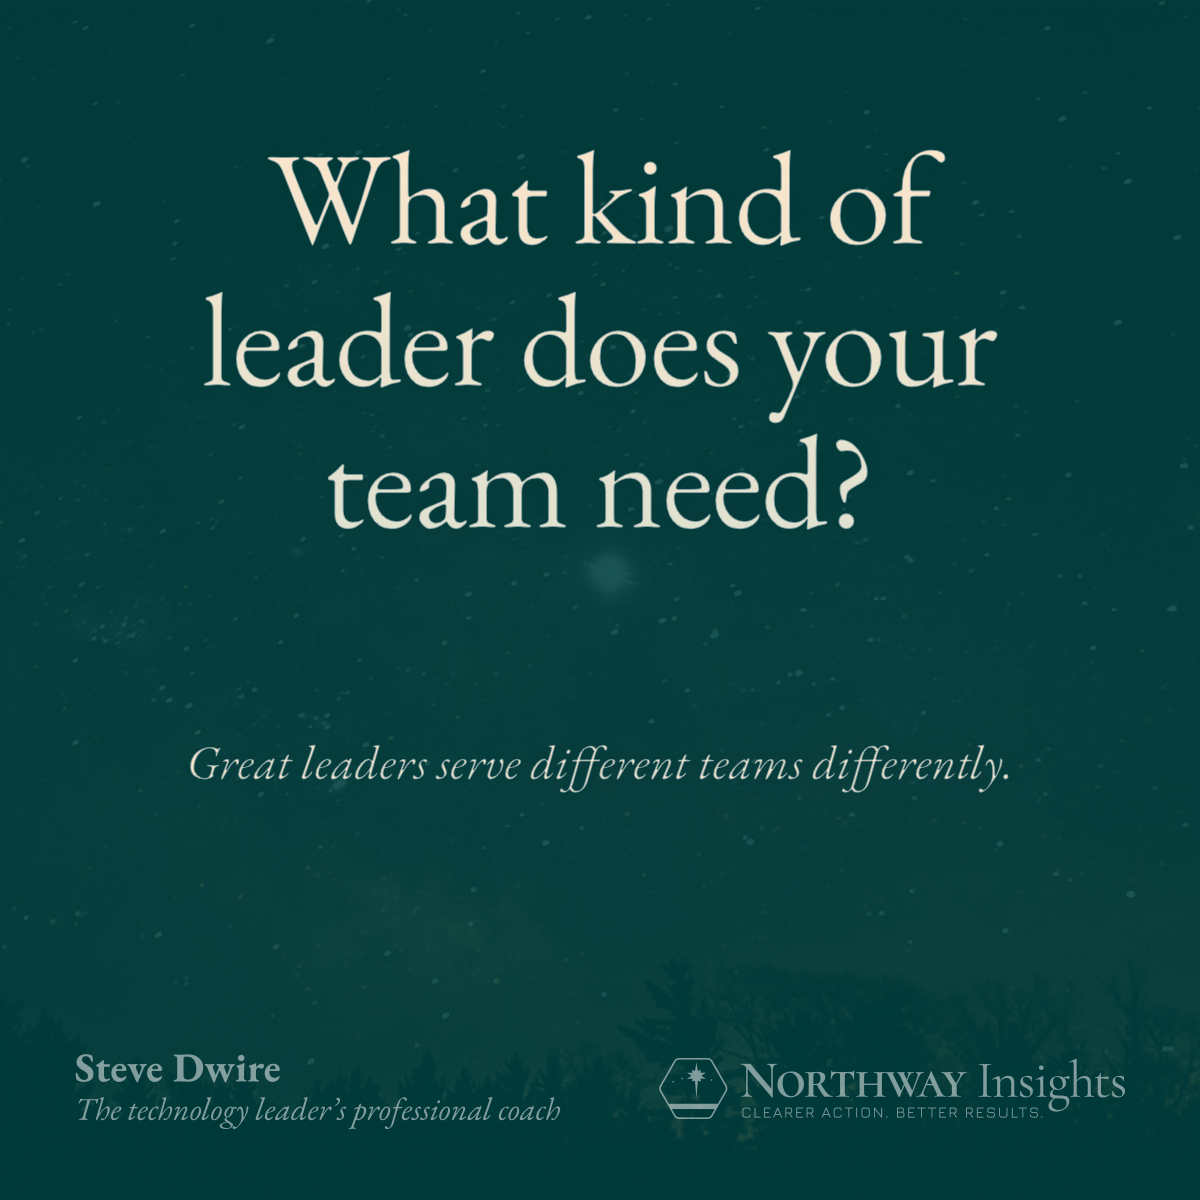 What kind of leader does your team need? Great leaders serve different teams differently.